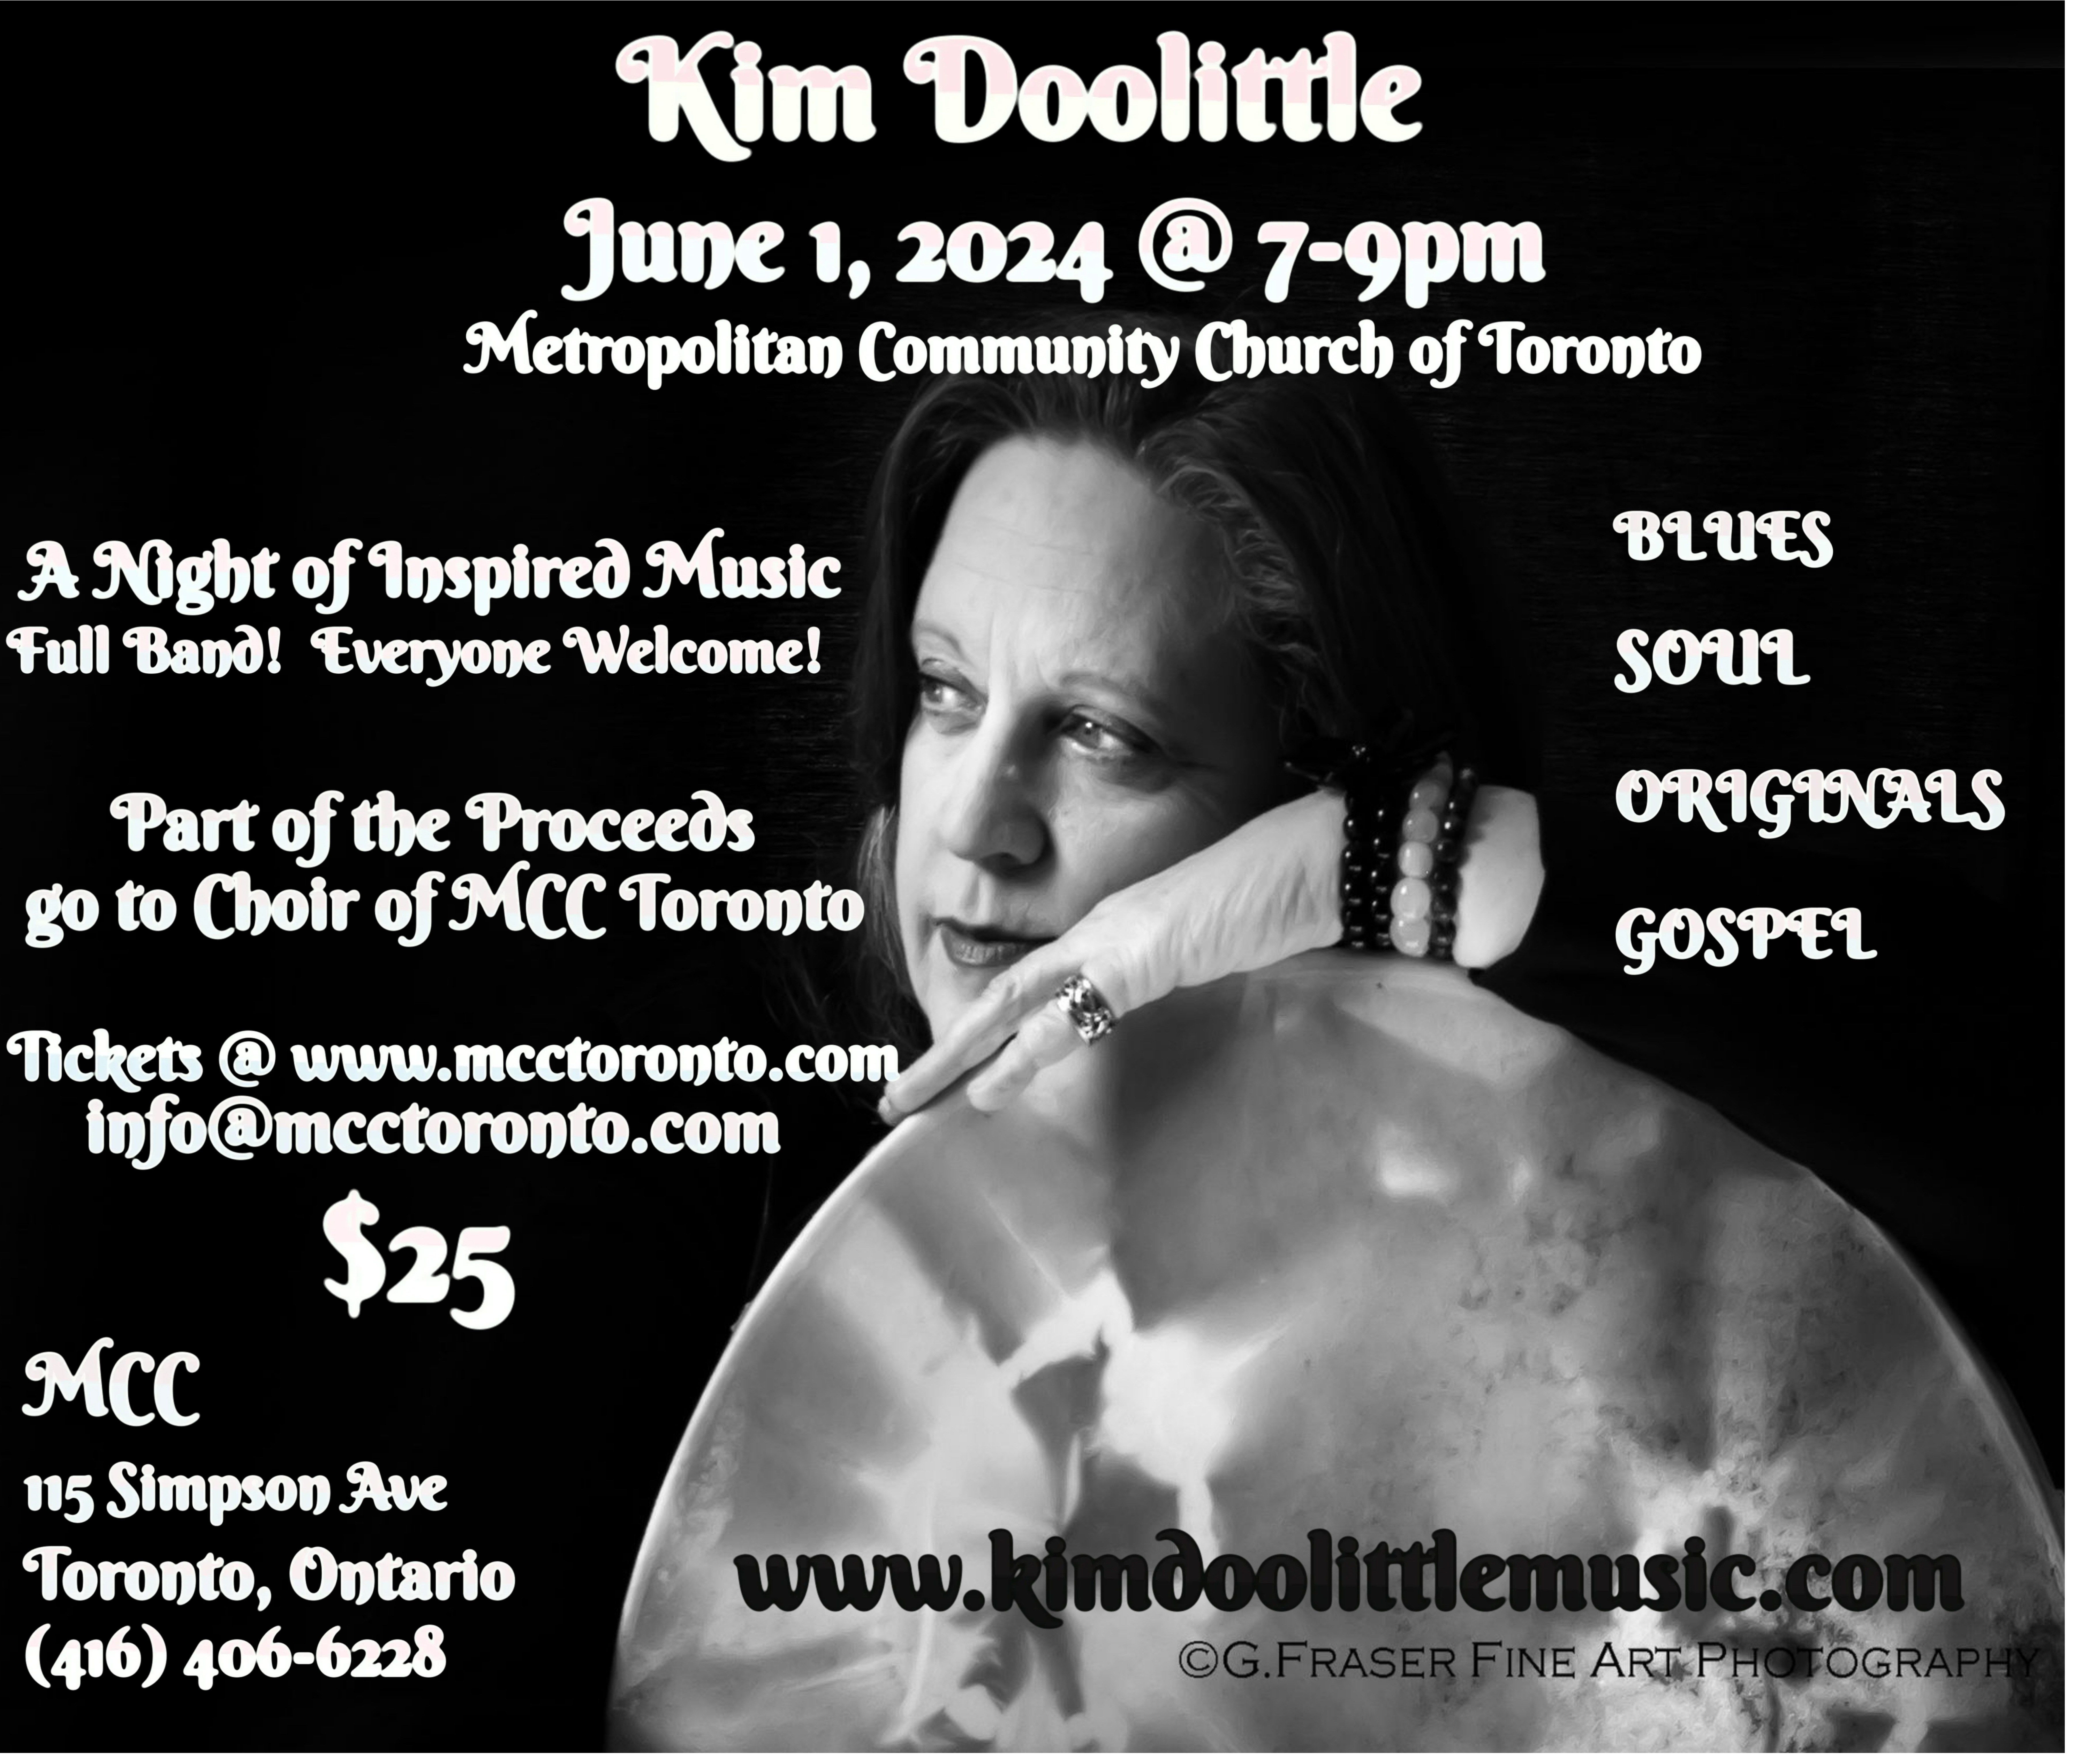 A promotional poster for a music event featuring Kim Doolittle on June 1, 2024. The poster is in black and white with an image of Kim Doolittle in a thoughtful pose, hand on cheek. Text highlights the event details, including time, location, music genres (Blues, Soul, Gospel, Originals), and ticket information. It mentions that part of the proceeds will benefit the Choir of MCC Toronto. URLs and contact details are provided at the bottom. The overall design has a classic and elegant look.